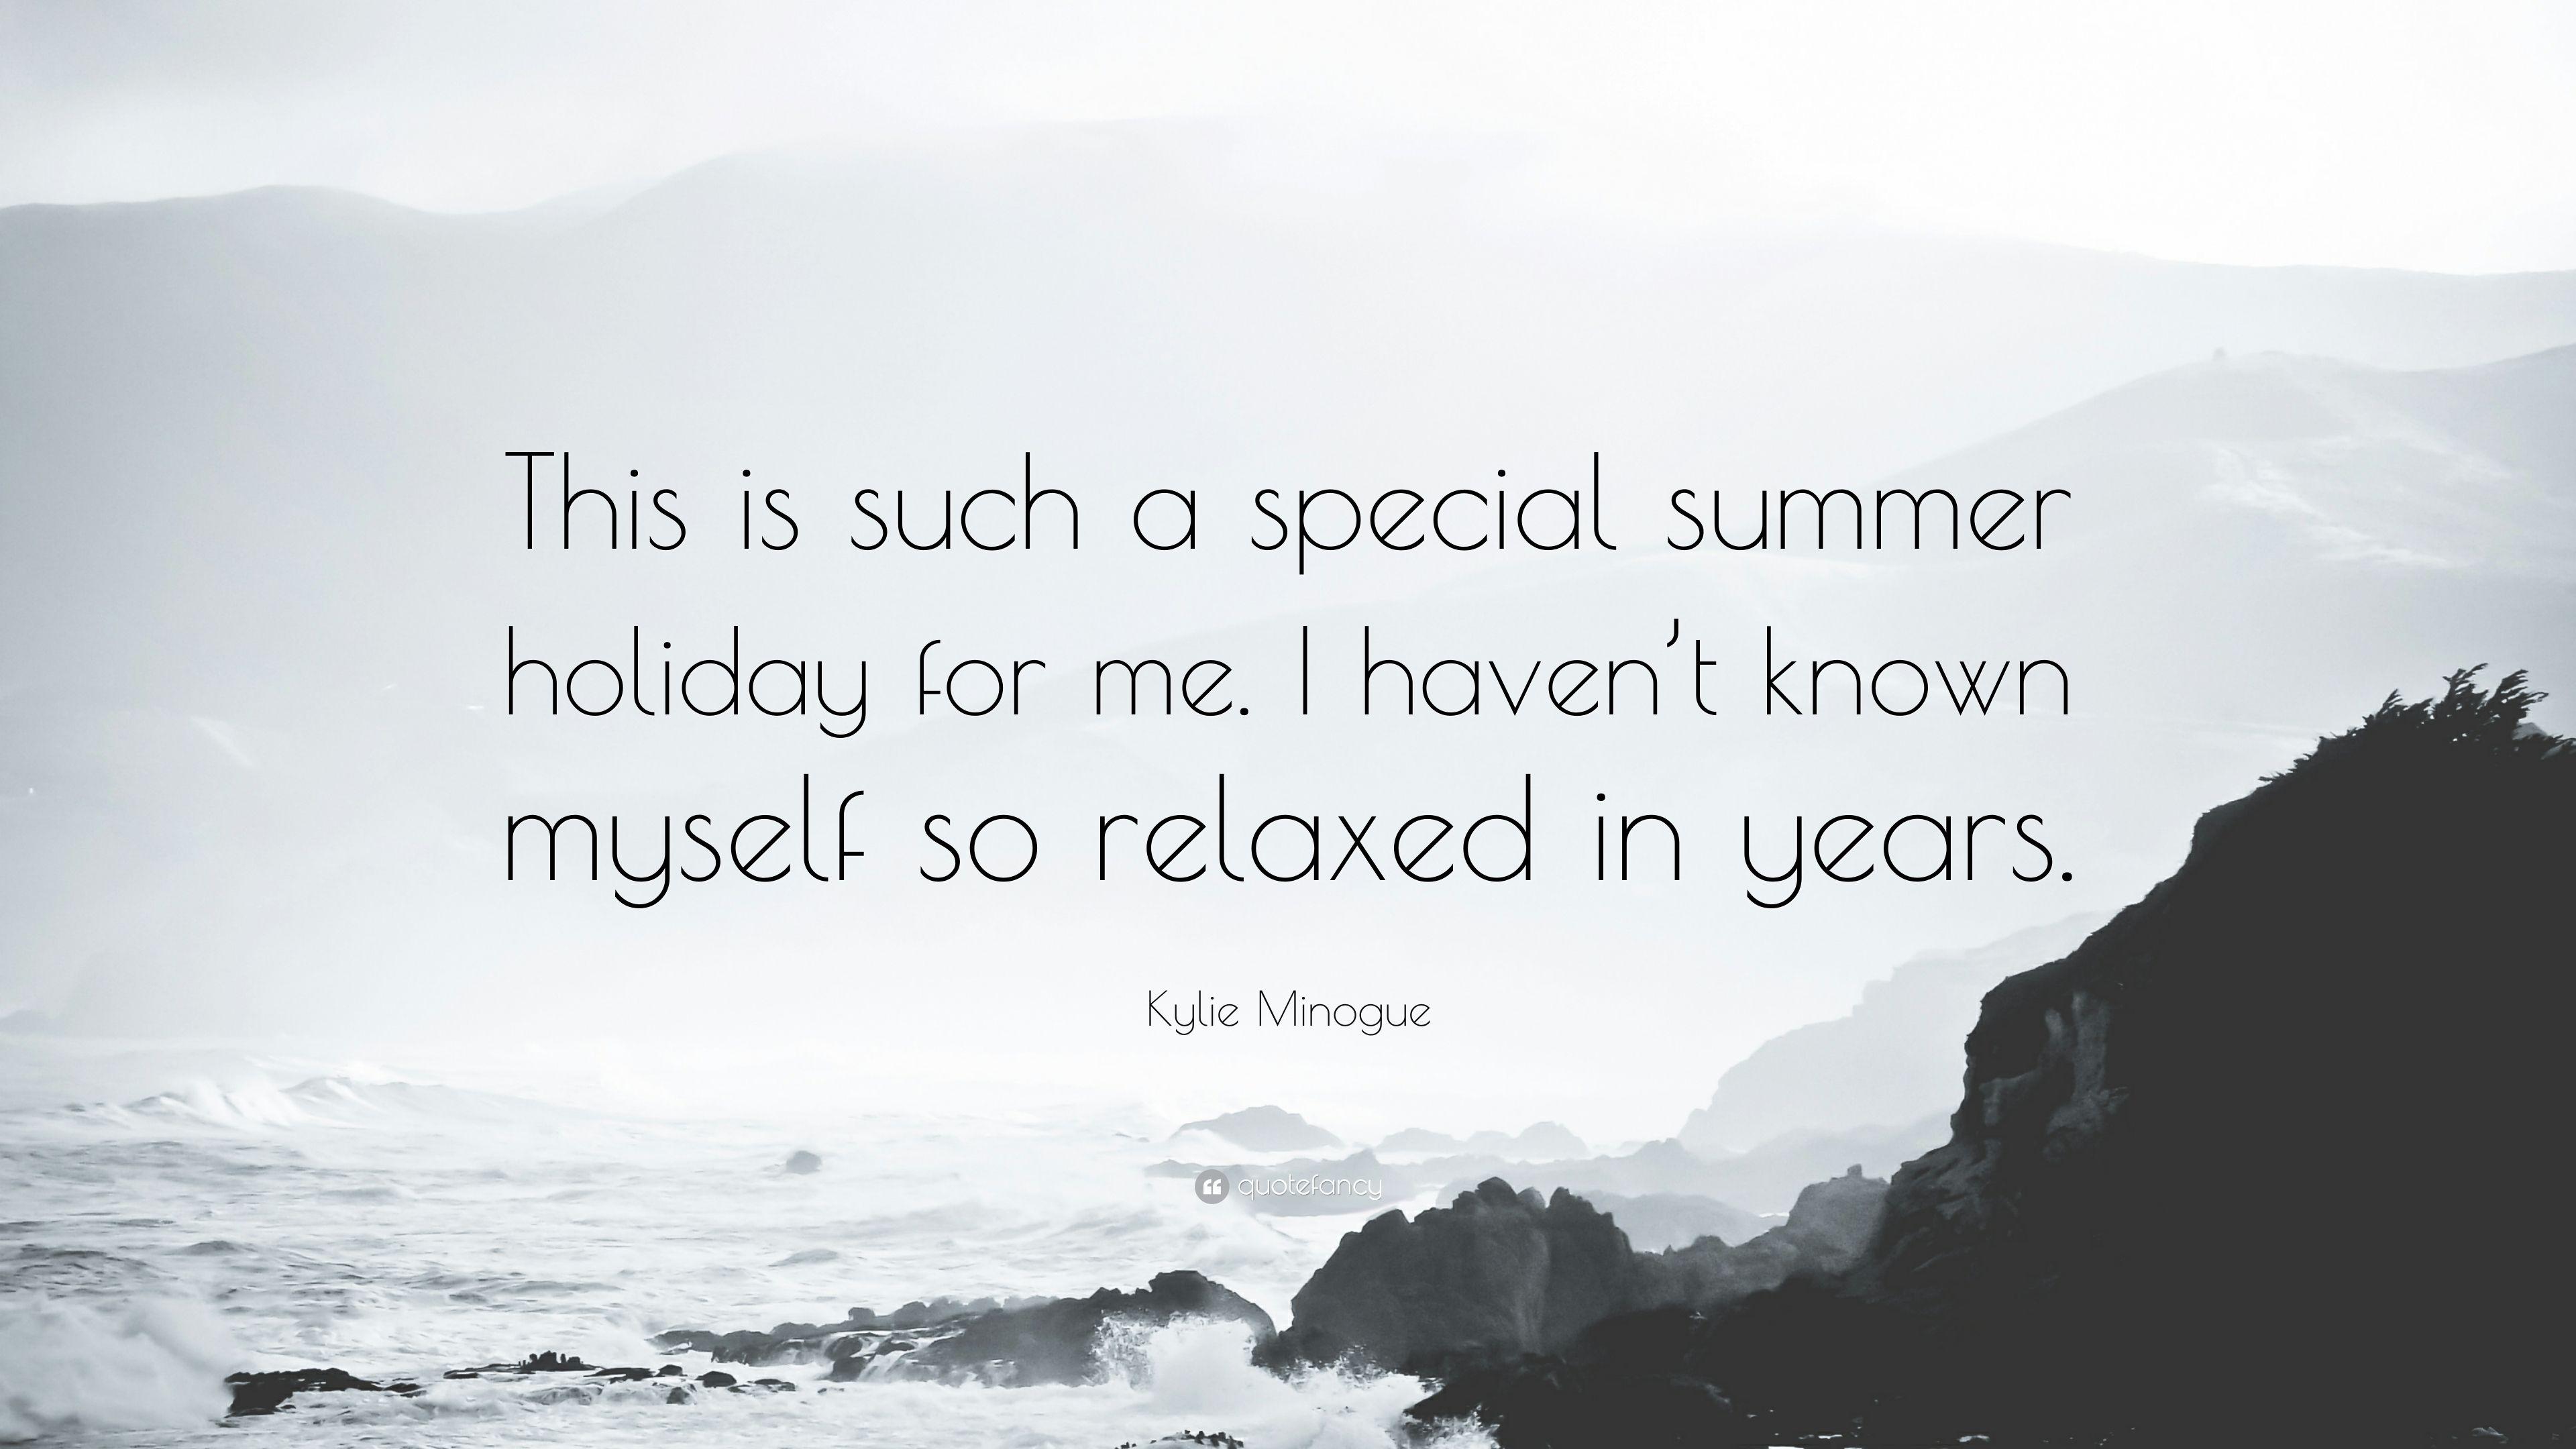 Kylie Minogue Quote: “This is such a special summer holiday for me